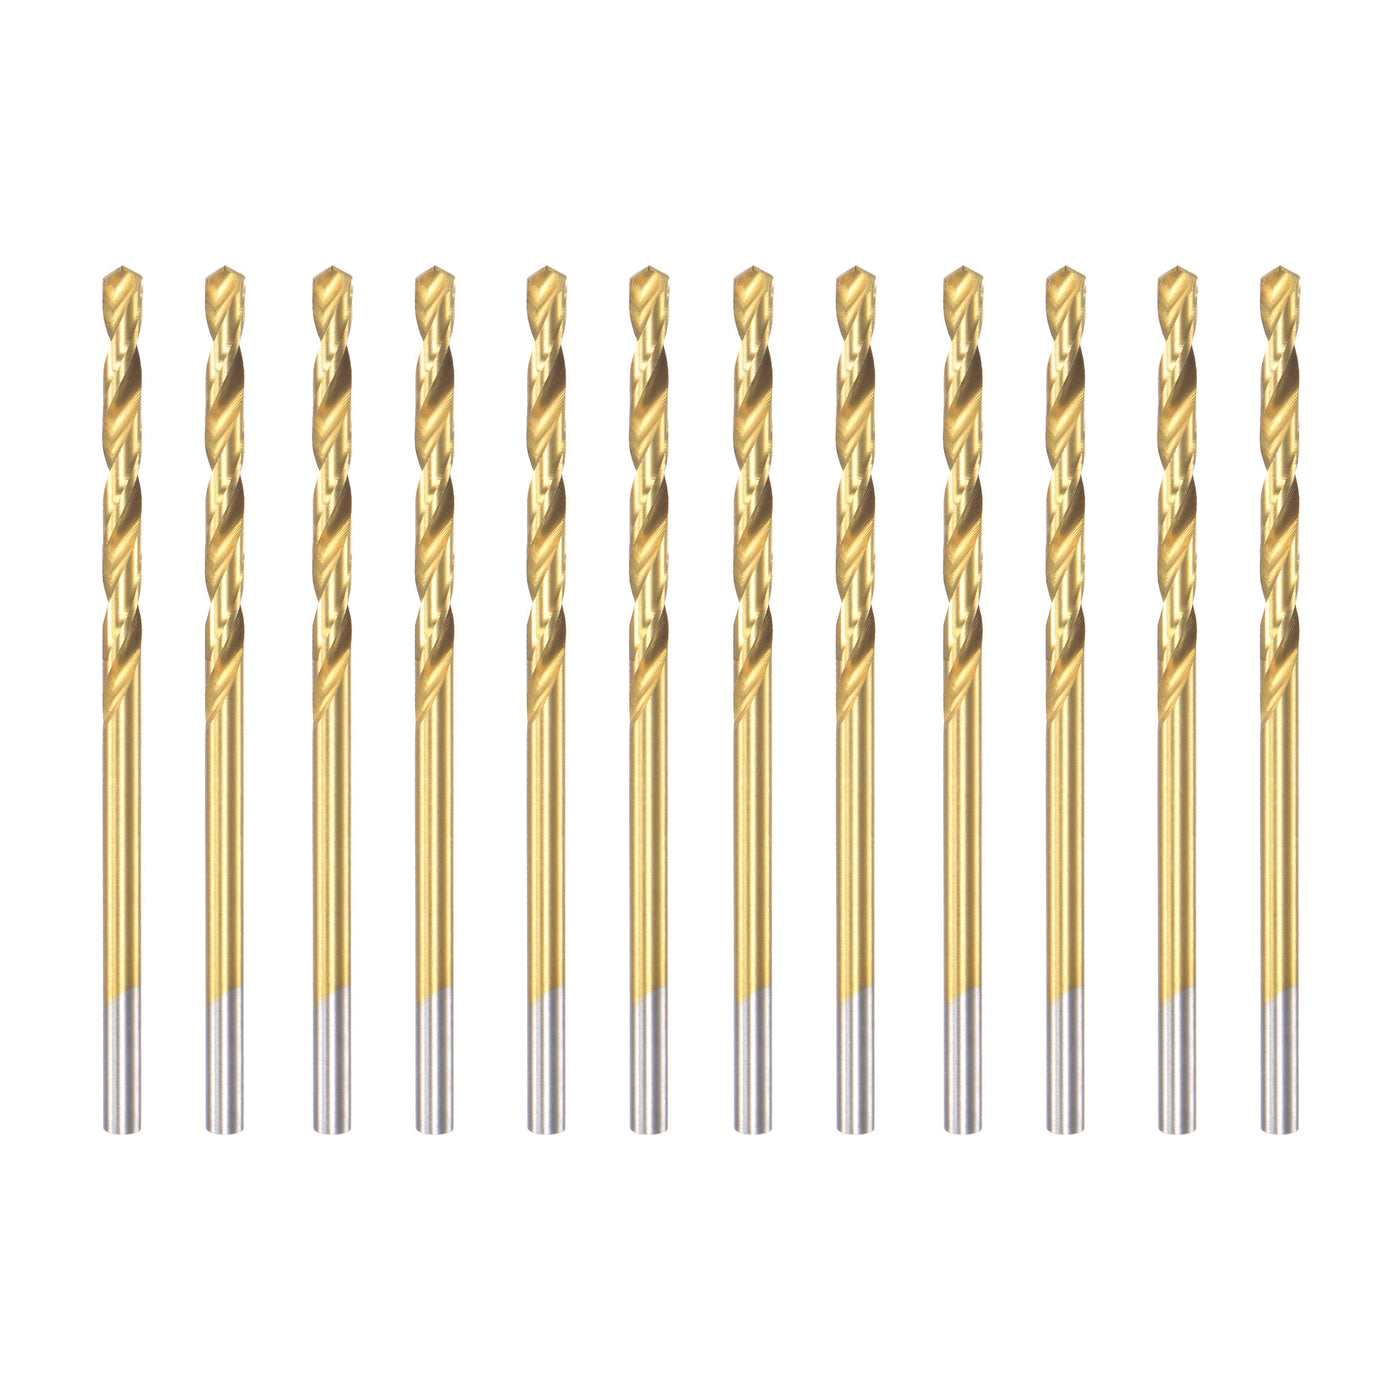 uxcell Uxcell High Speed Steel Twist Drill Bit 2.6mm Fully Ground Titanium Coated 12 Pcs